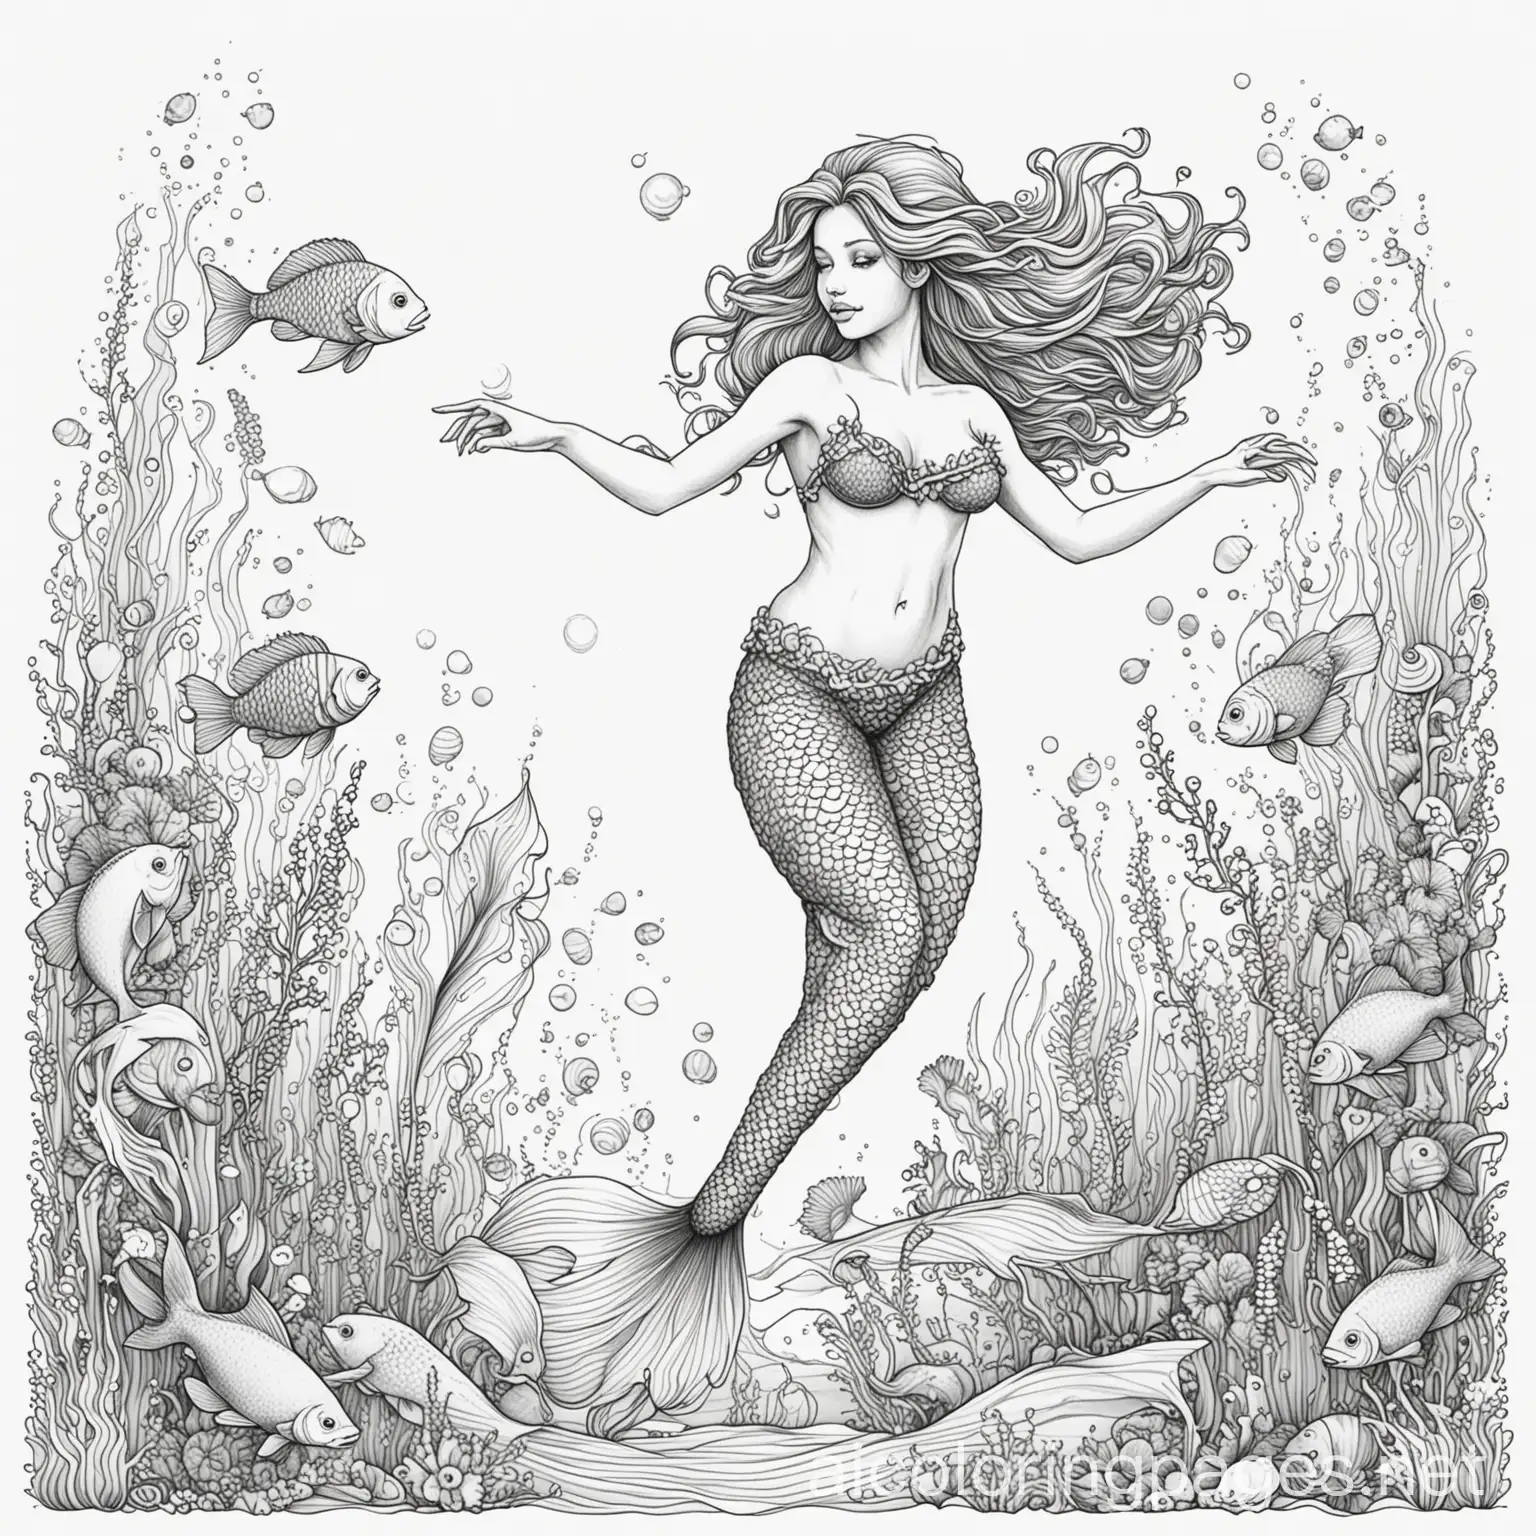 Mermaid dancing in Ocean with colorful fish, Coloring Page, black and white, line art, white background, Simplicity, Ample White Space. The background of the coloring page is plain white to make it easy for young children to color within the lines. The outlines of all the subjects are easy to distinguish, making it simple for kids to color without too much difficulty